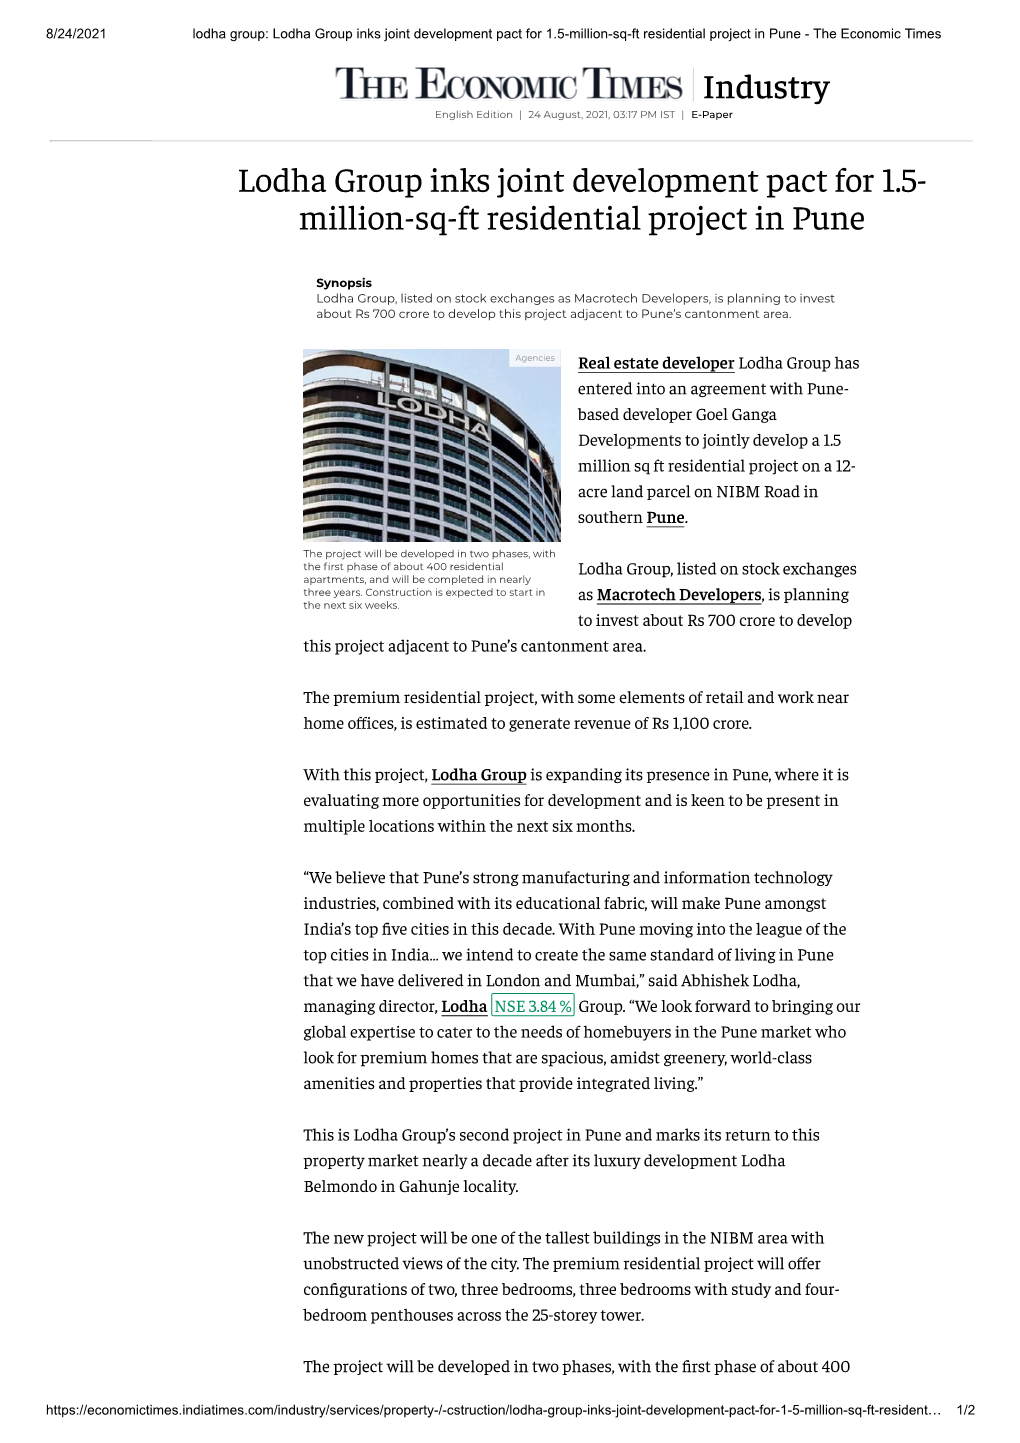 Lodha Group Inks Joint Development Pact For